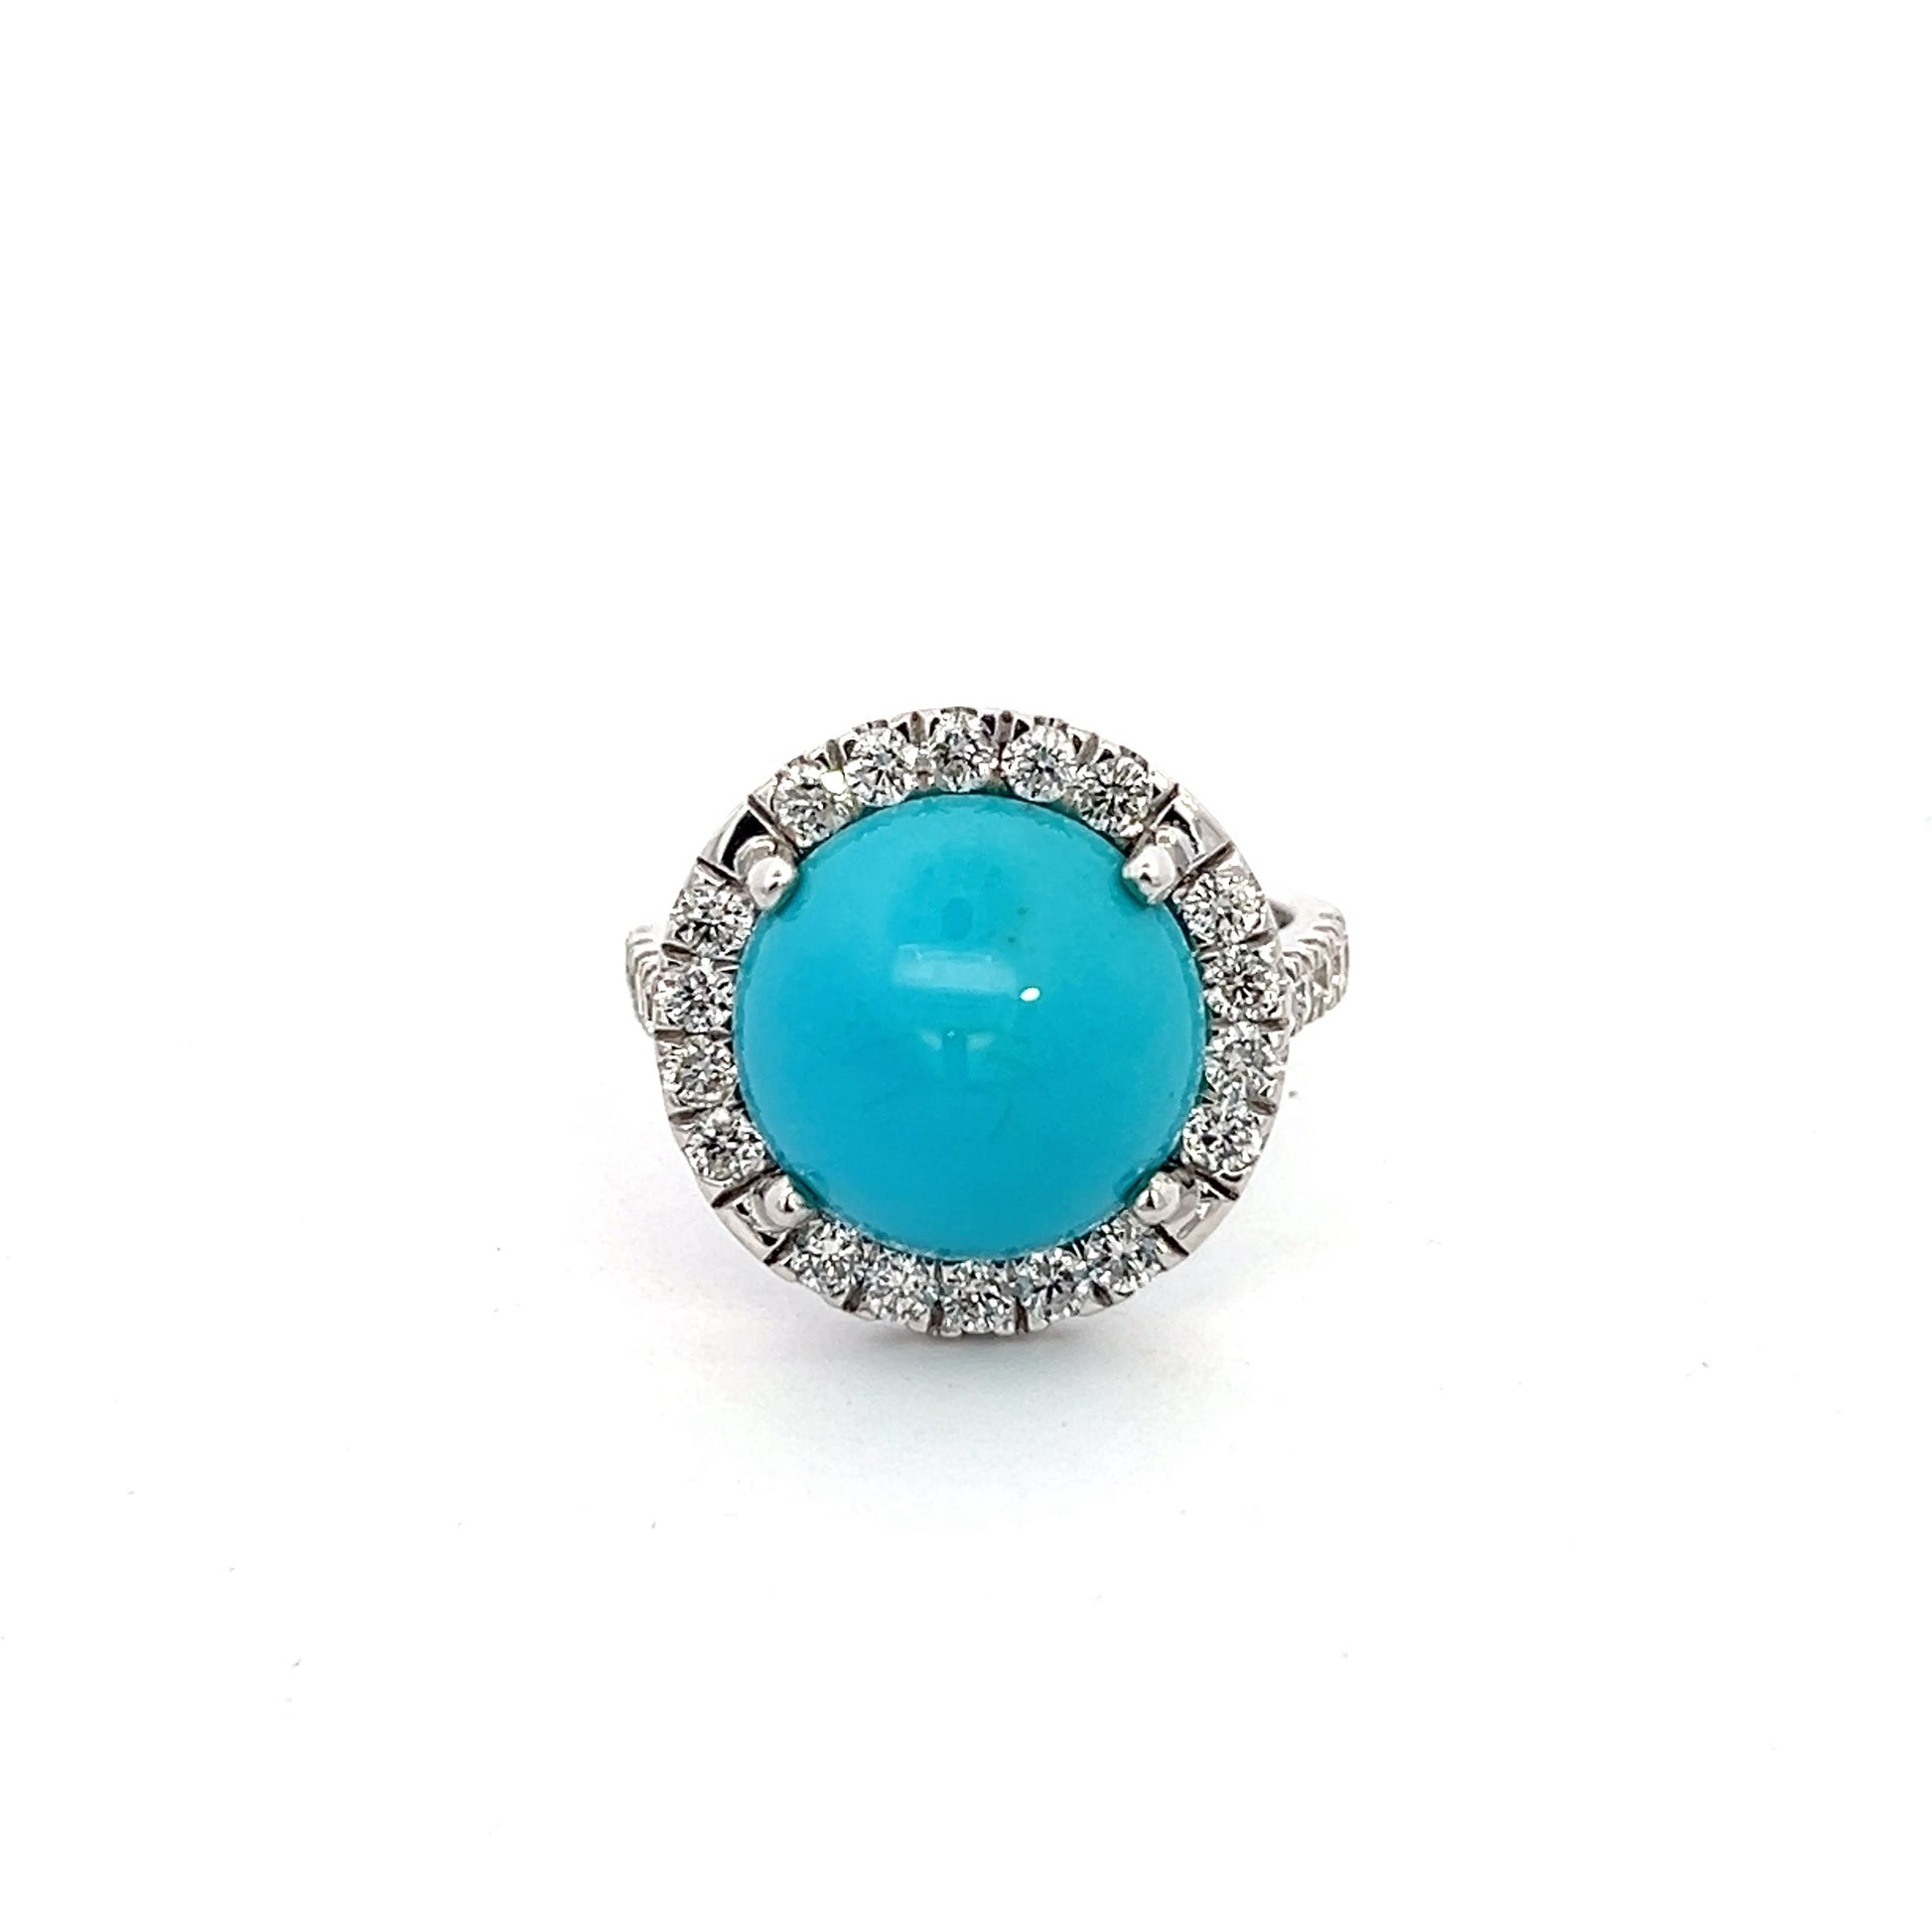 Natural Persian Turquoise Diamond Ring 6.5 14k WG 8.33 TCW Certified $5,950 310657 - Certified Fine Jewelry